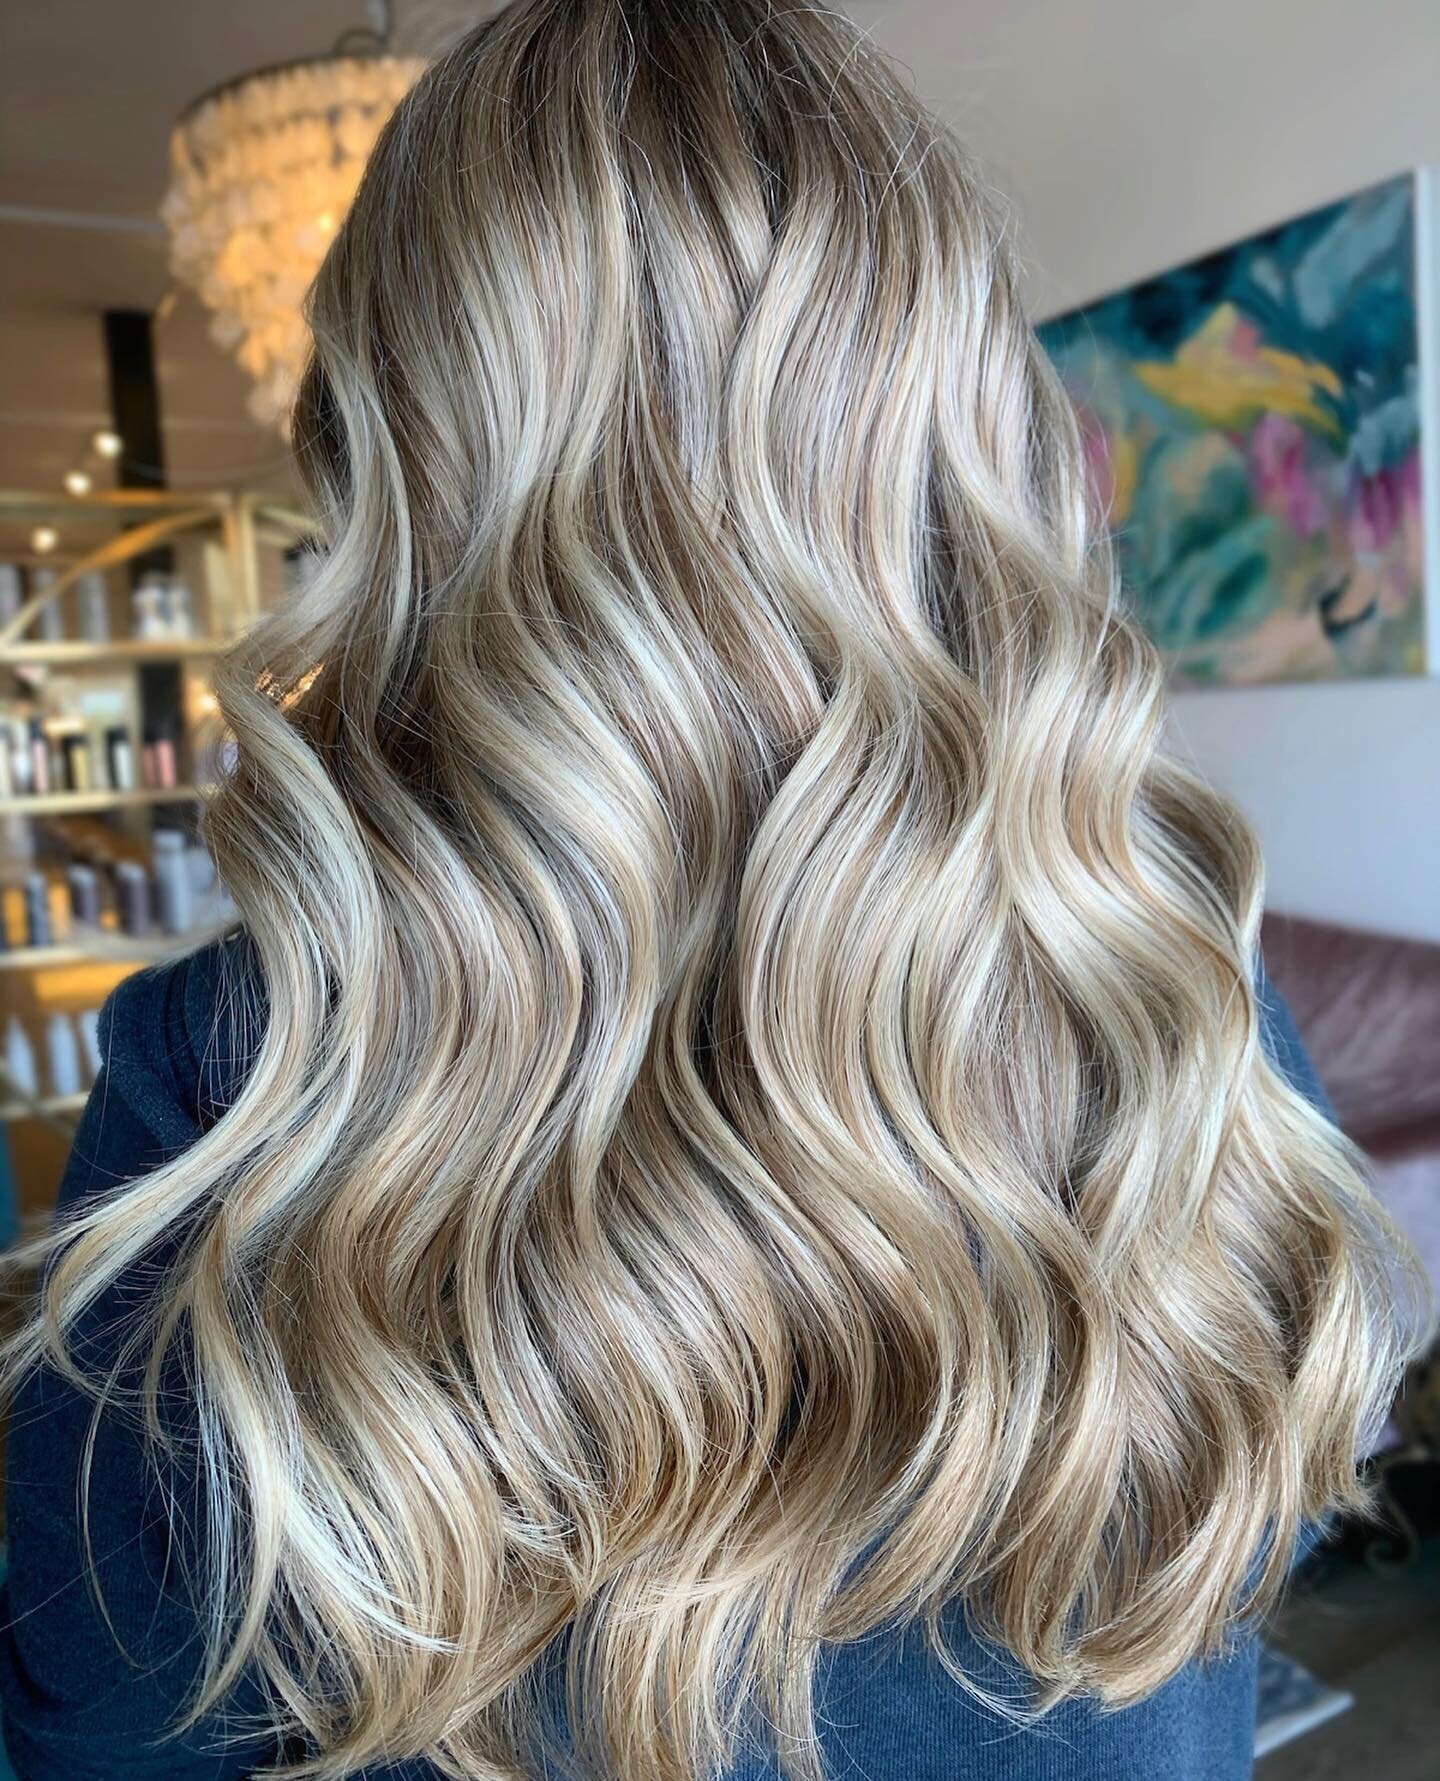 Creamy blonde

Color by me
Style by @shearsandheels 

#goldwellcolor #creamyblonde #blondehair #blondehighlights #hairgoals #teasylights #balayage